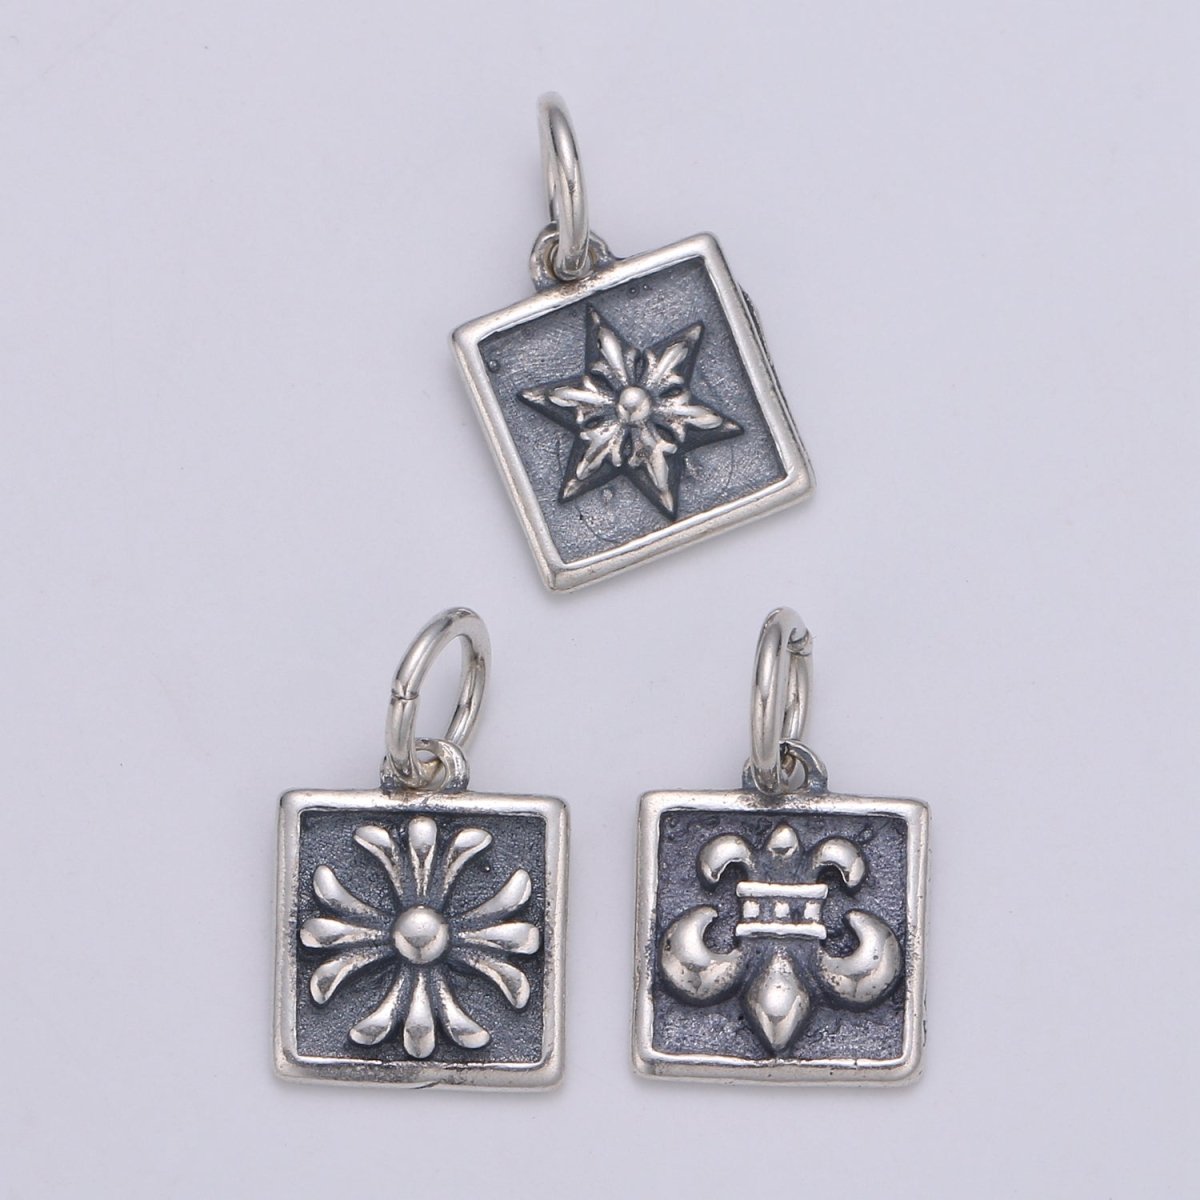 925 Sterling Silver Snowflake Charm, Square Charm Flower Charm for Necklace Bracelet Earring, Lily Flower Charm SL-065 SL-066 SL-067 - DLUXCA